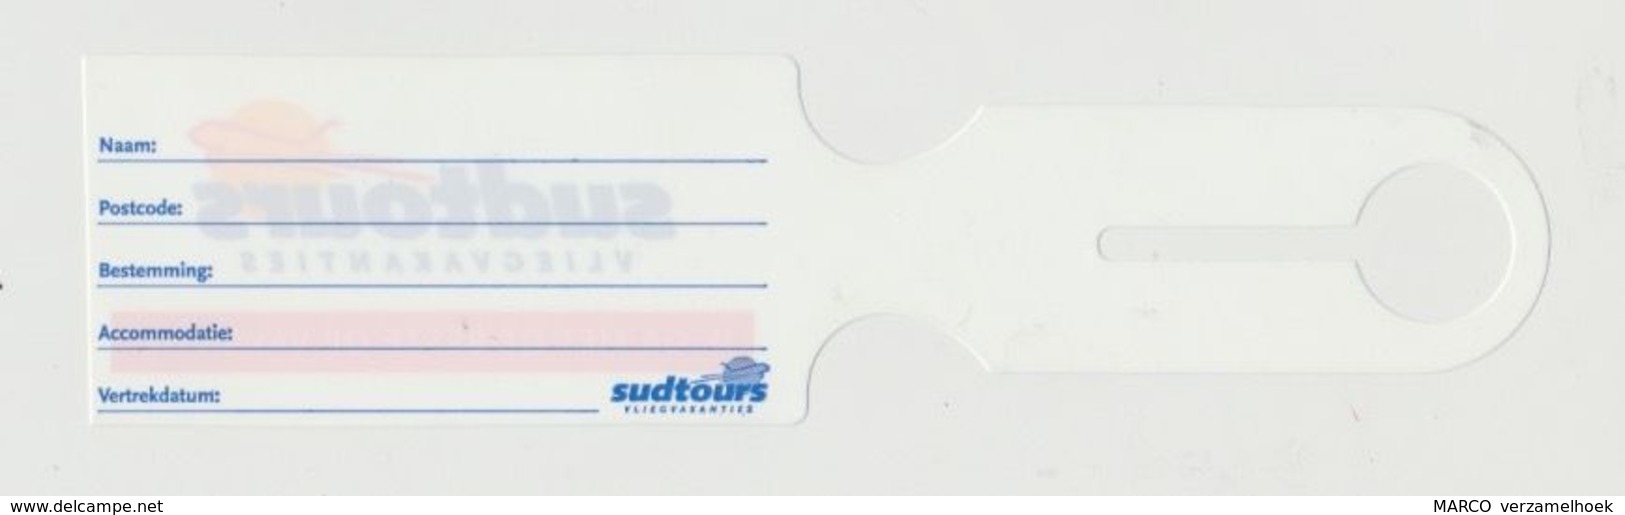 Luggage Tag-kofferlabel Sudtours Vliegvakanties - Baggage Labels & Tags